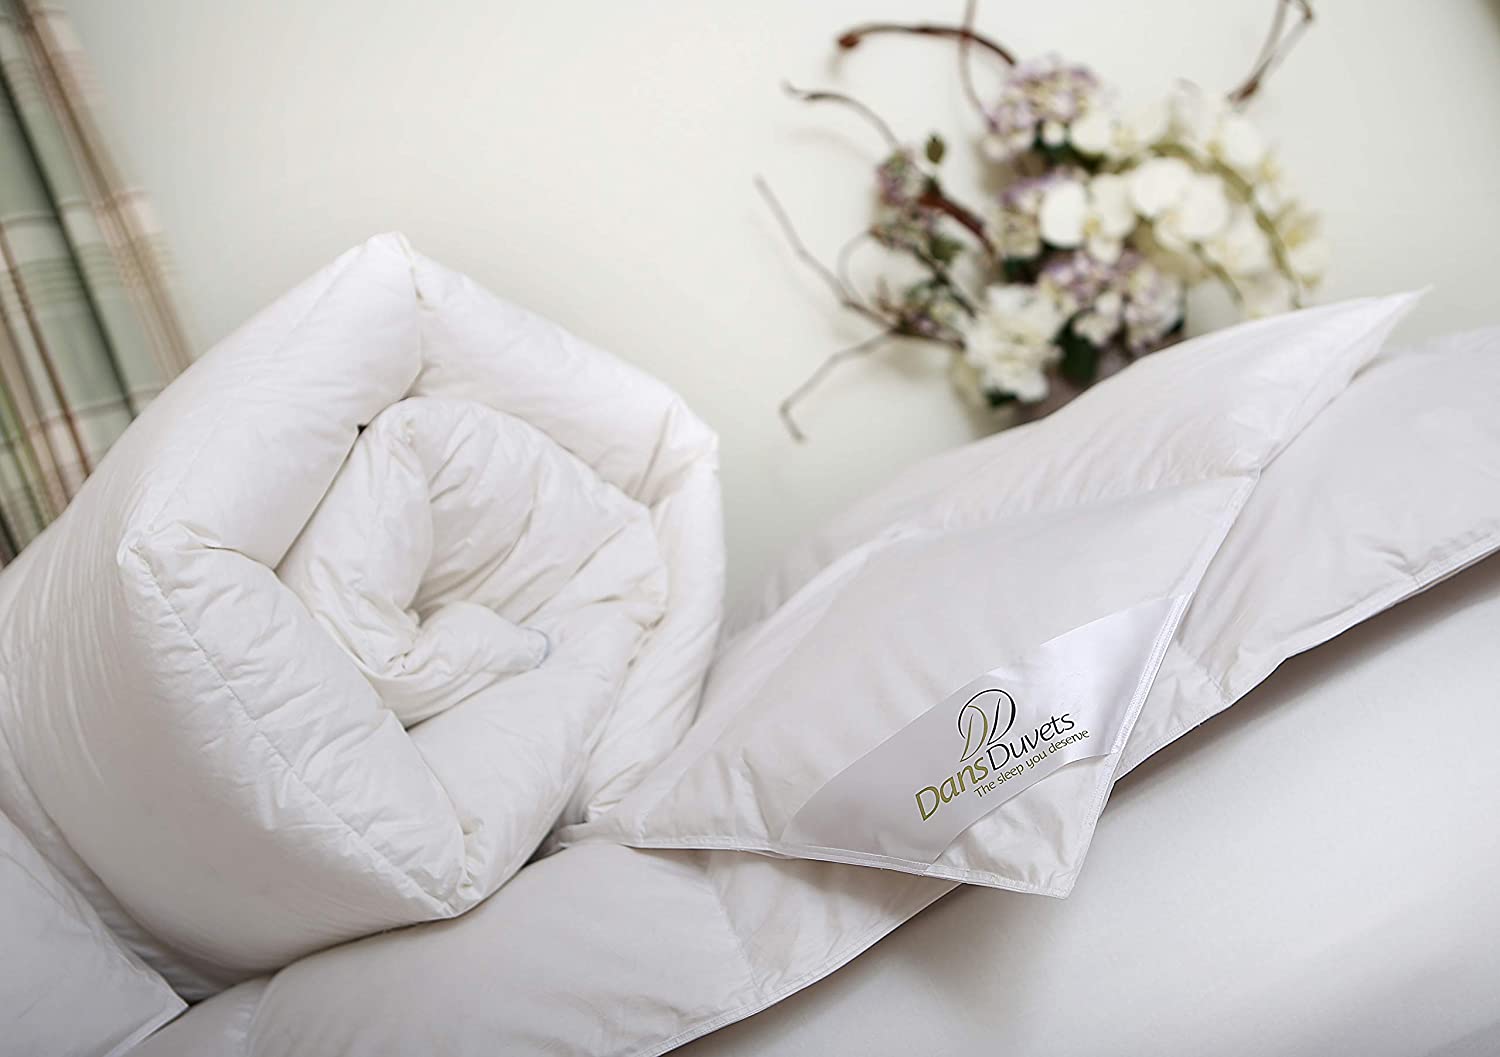 Comfortable and warm goose down duvets